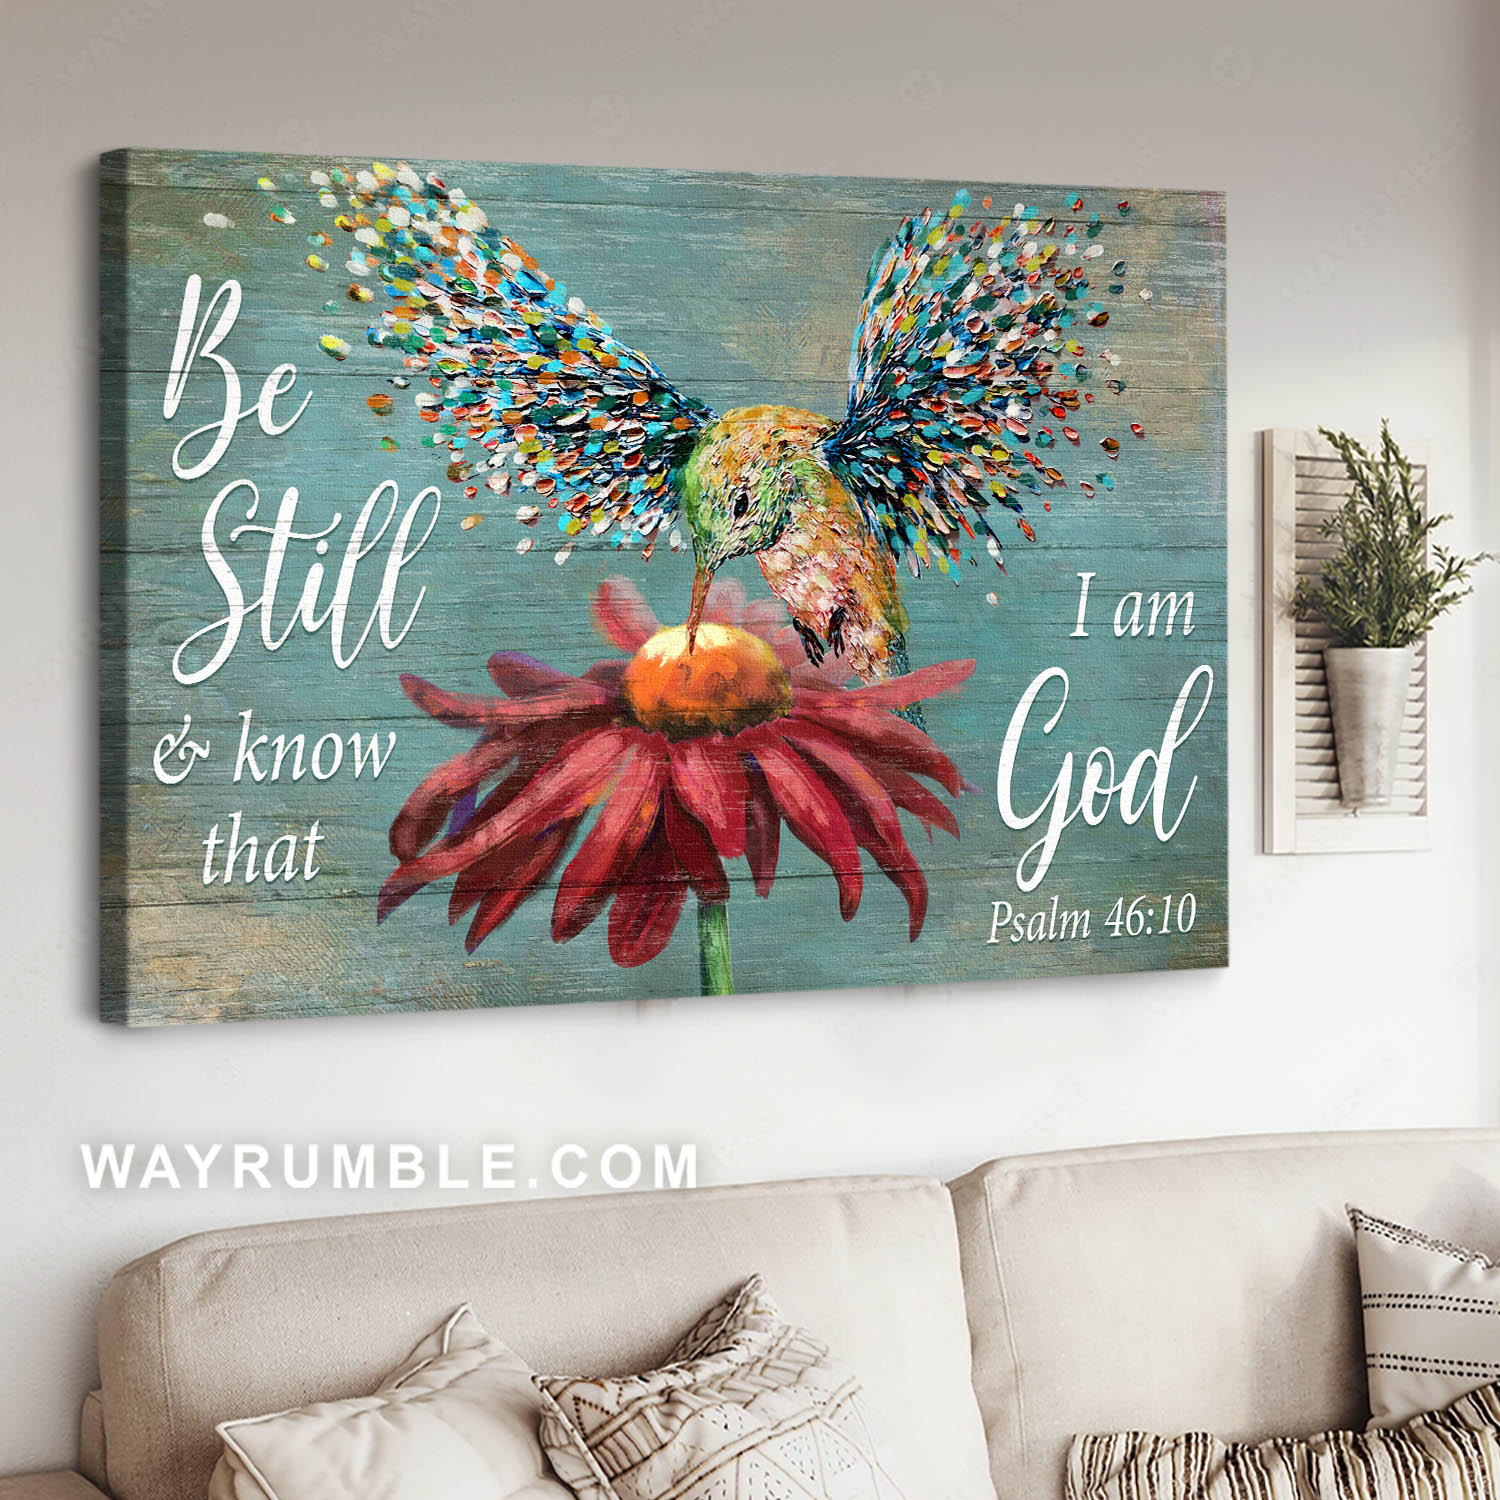 Inspirational Art Be Still and know that I am God Yellow Daisy